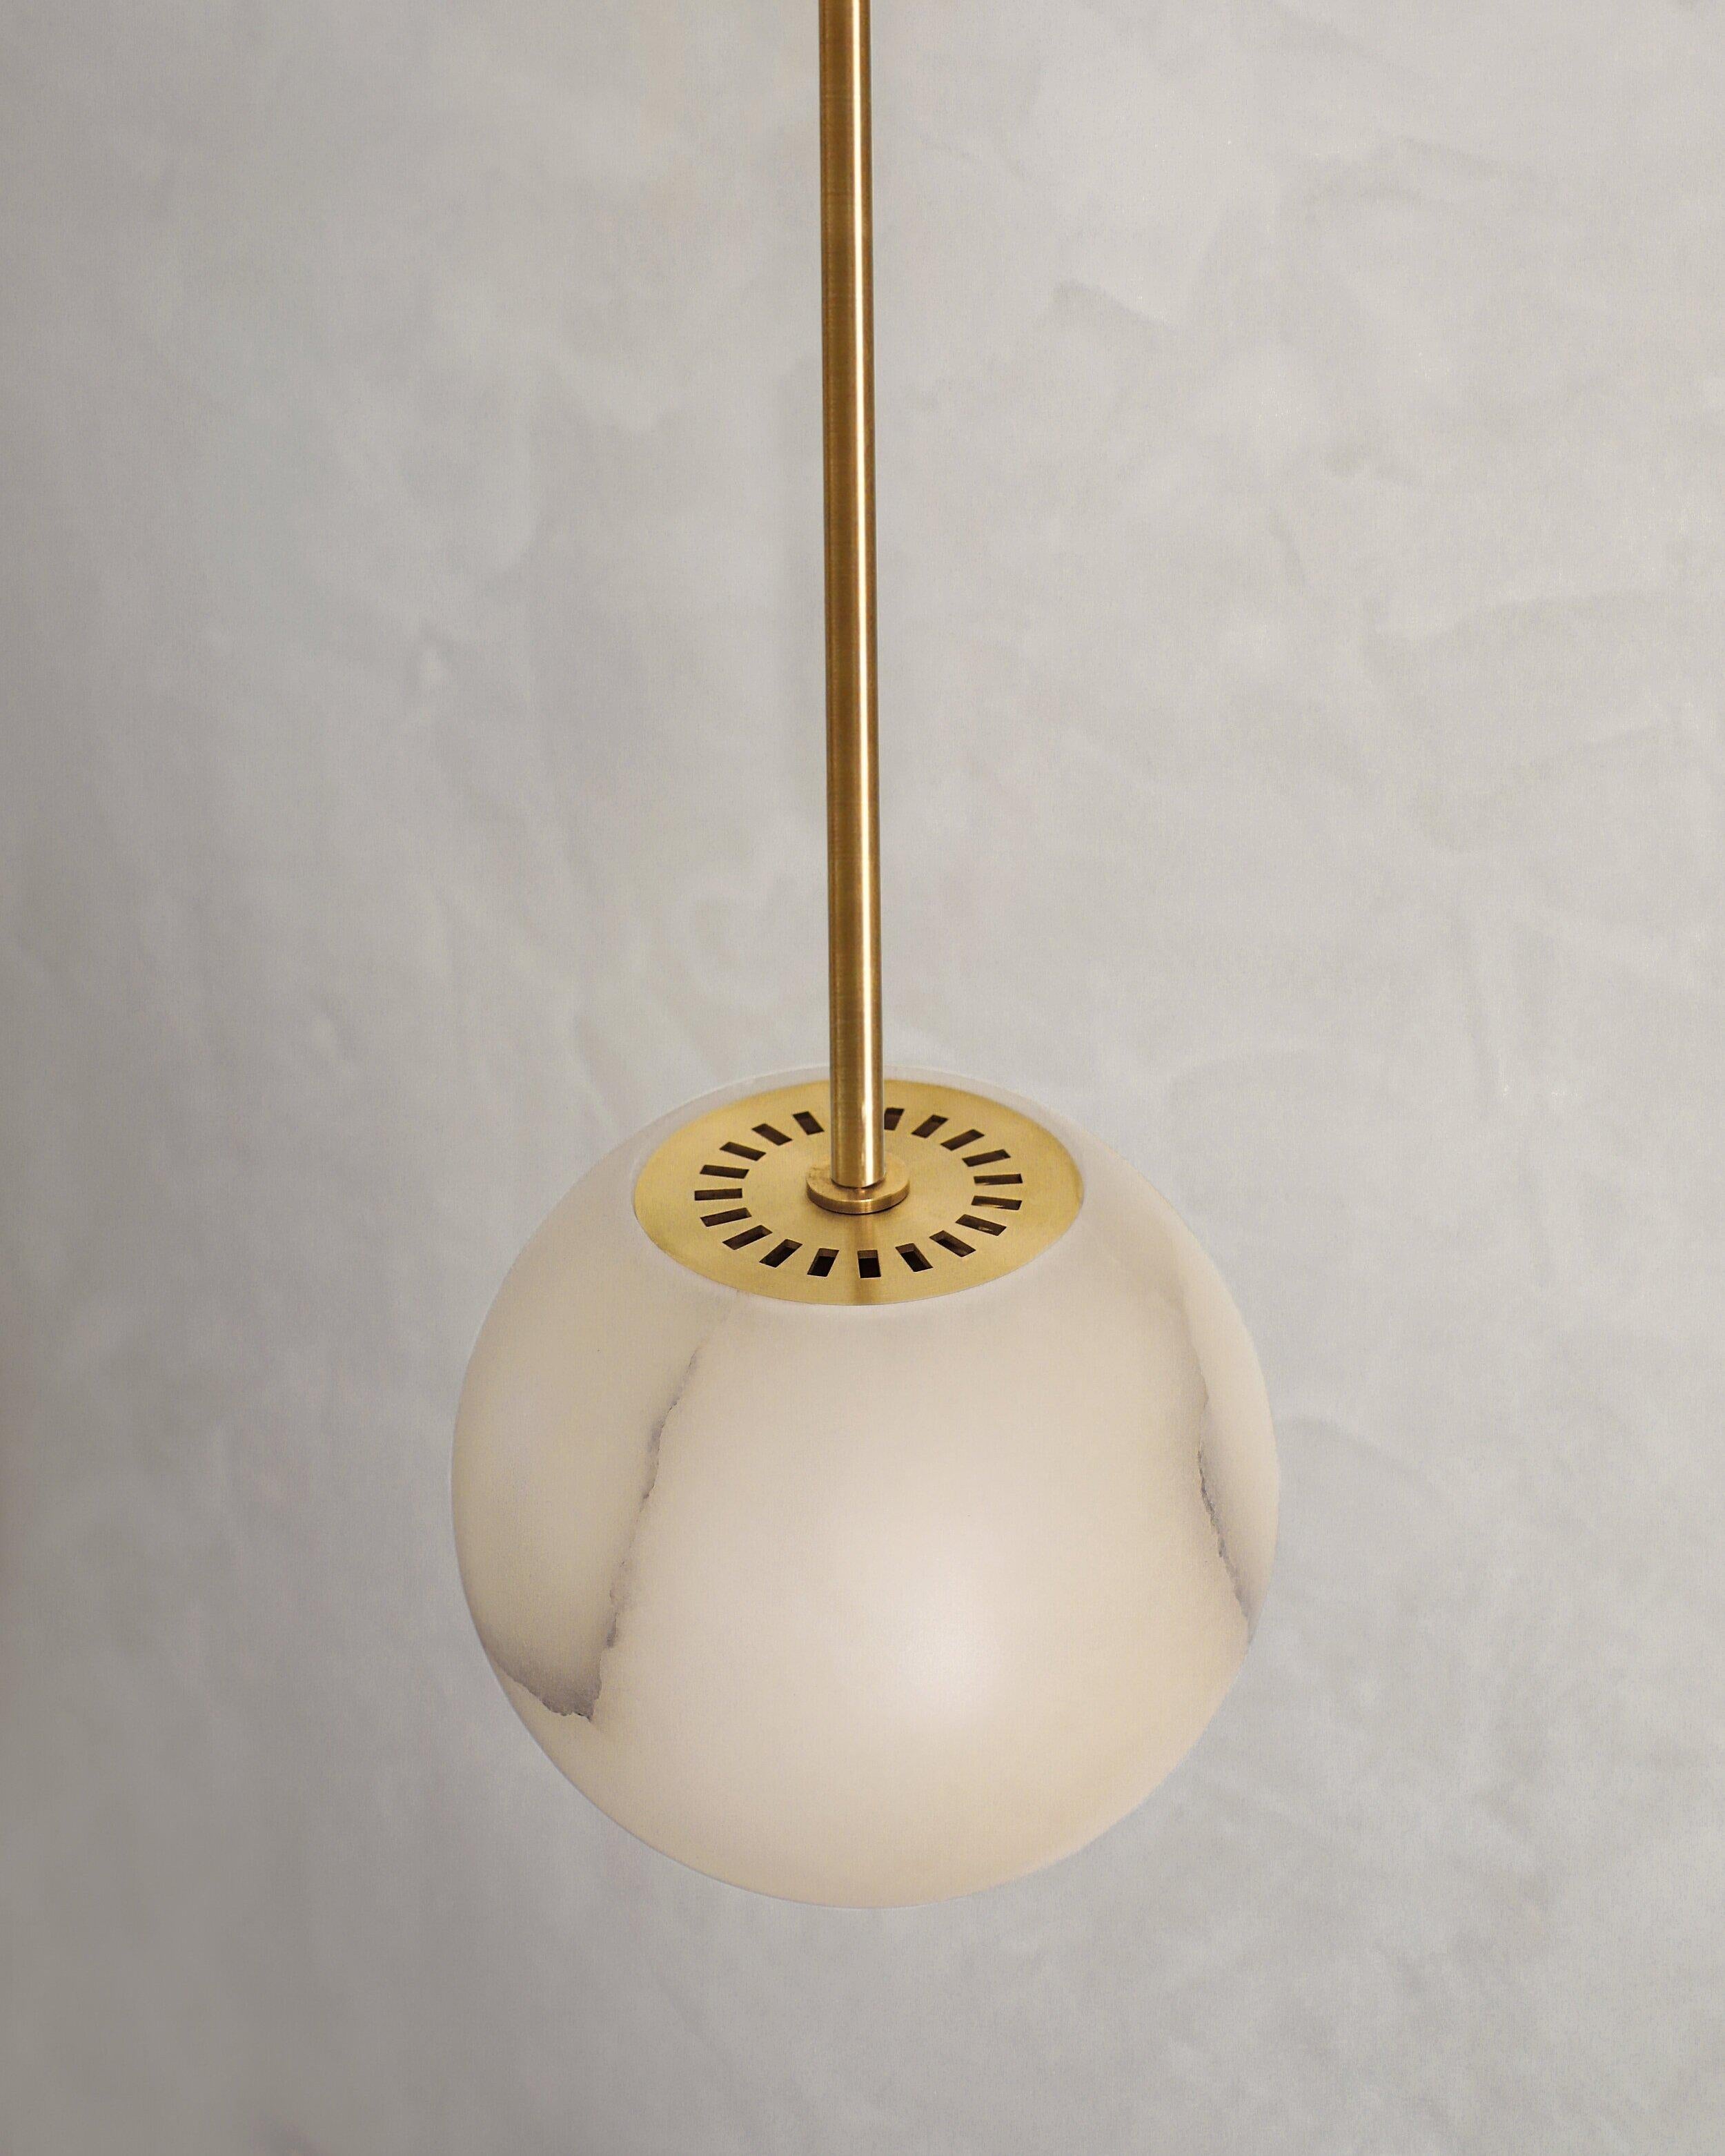 Planette tube 12 pendant by Contain.
Dimensions: D 12 x H 100 cm (custom lenght).
Materials: alabaster, brass.
Also available in different finishes and dimensions (Ø12 cm / Ø16,5 cm / Ø18 cm / Ø22 cm x custom length).

All our lamps can be wired